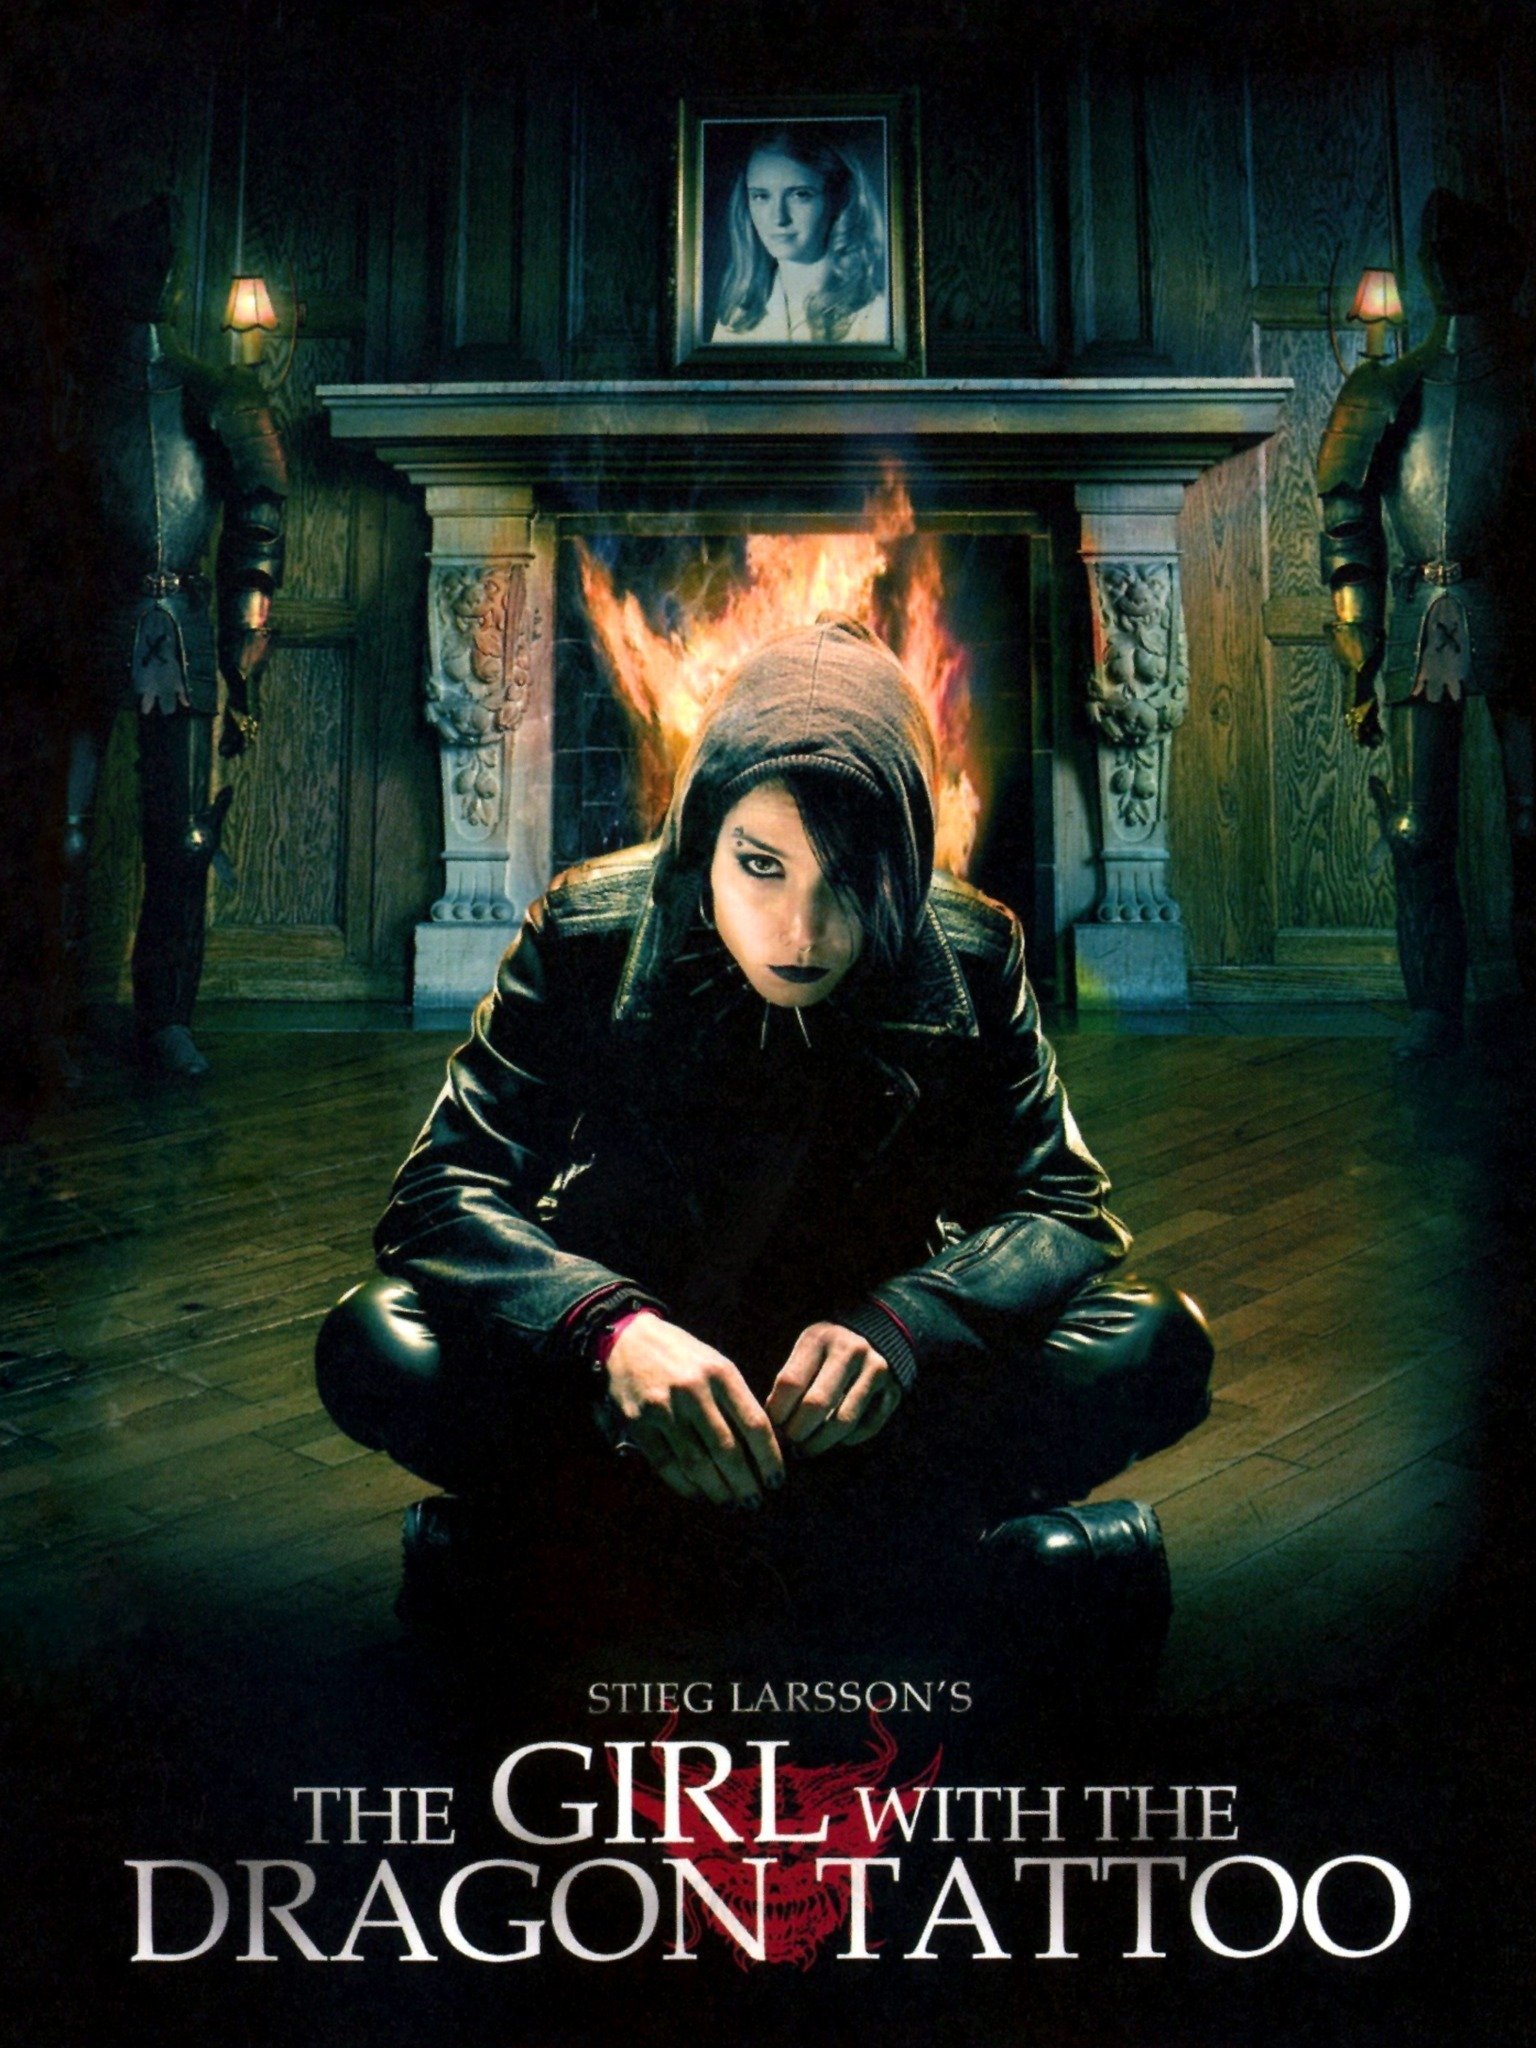 Filme cu final complet neașteptat. The Girl with the Dragon Tattoo